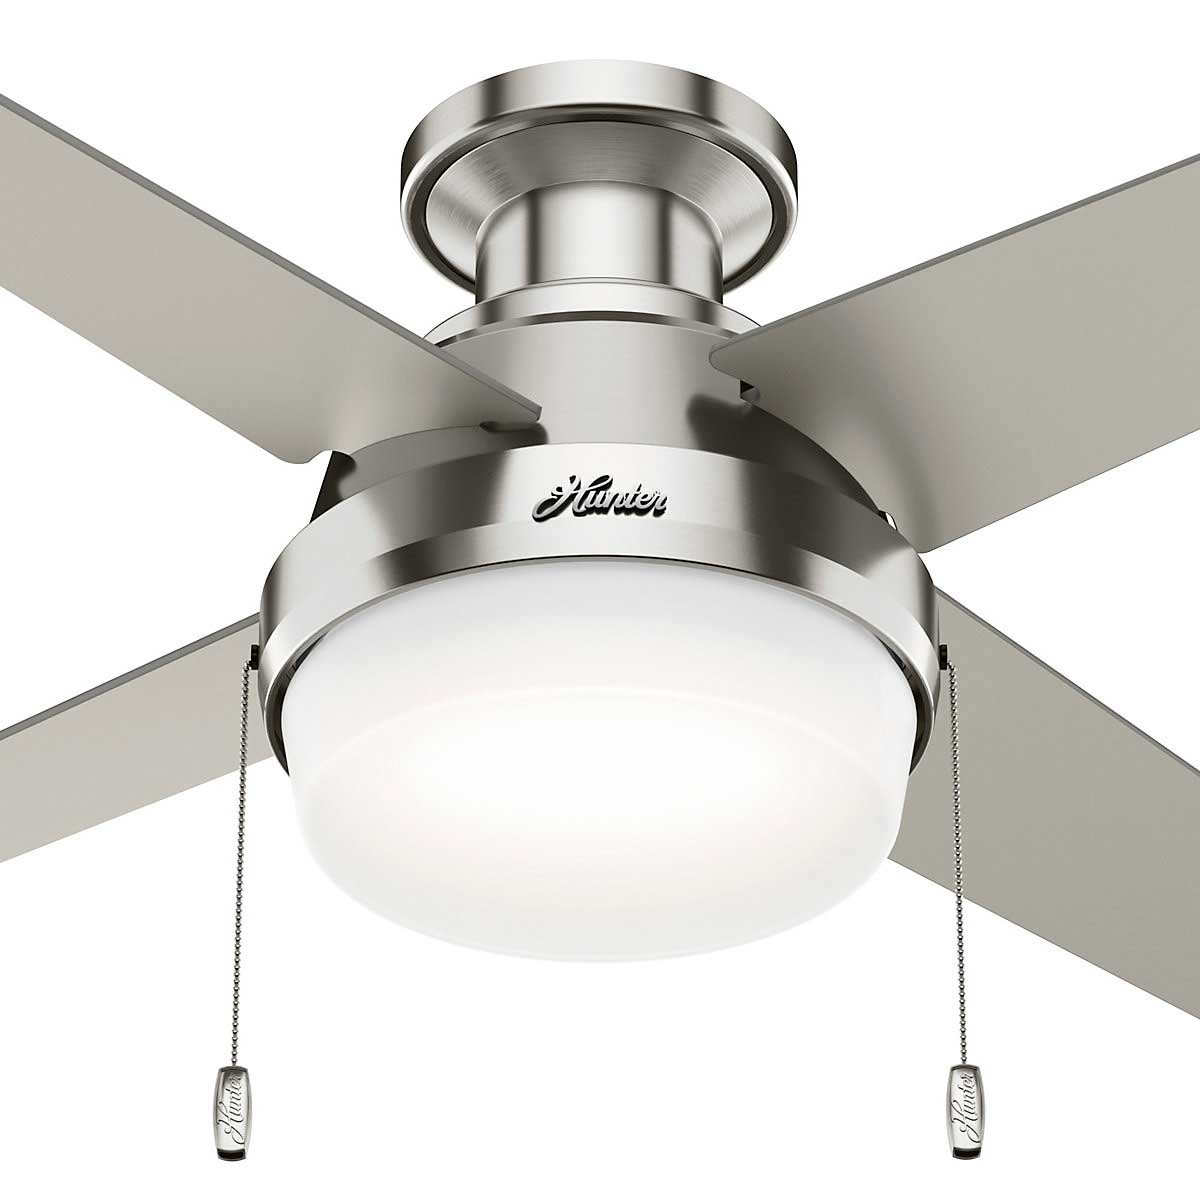 Ristrello Ceiling Fan With Light 44